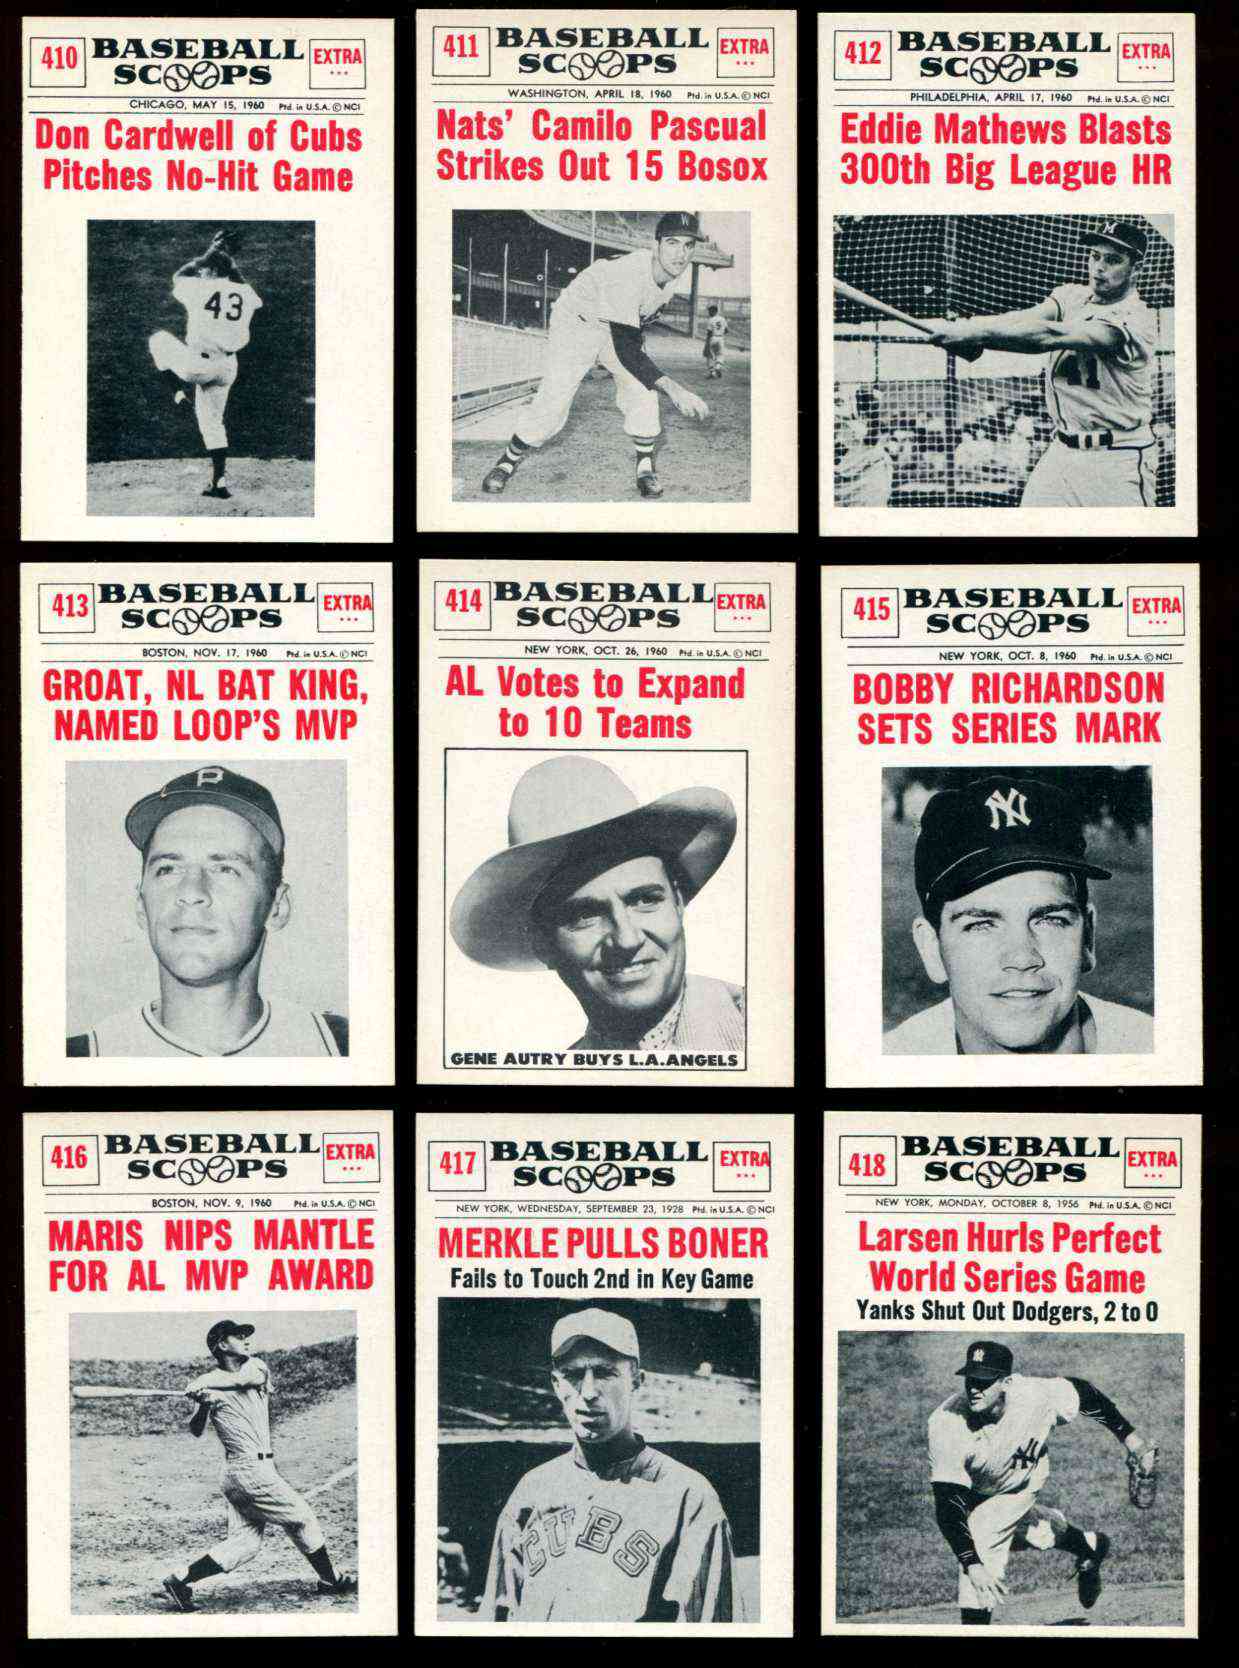 1961 Nu-Card Scoops #414 Gene Autry OWNER 'AL Votes to Expand to 10 Teams' Baseball cards value